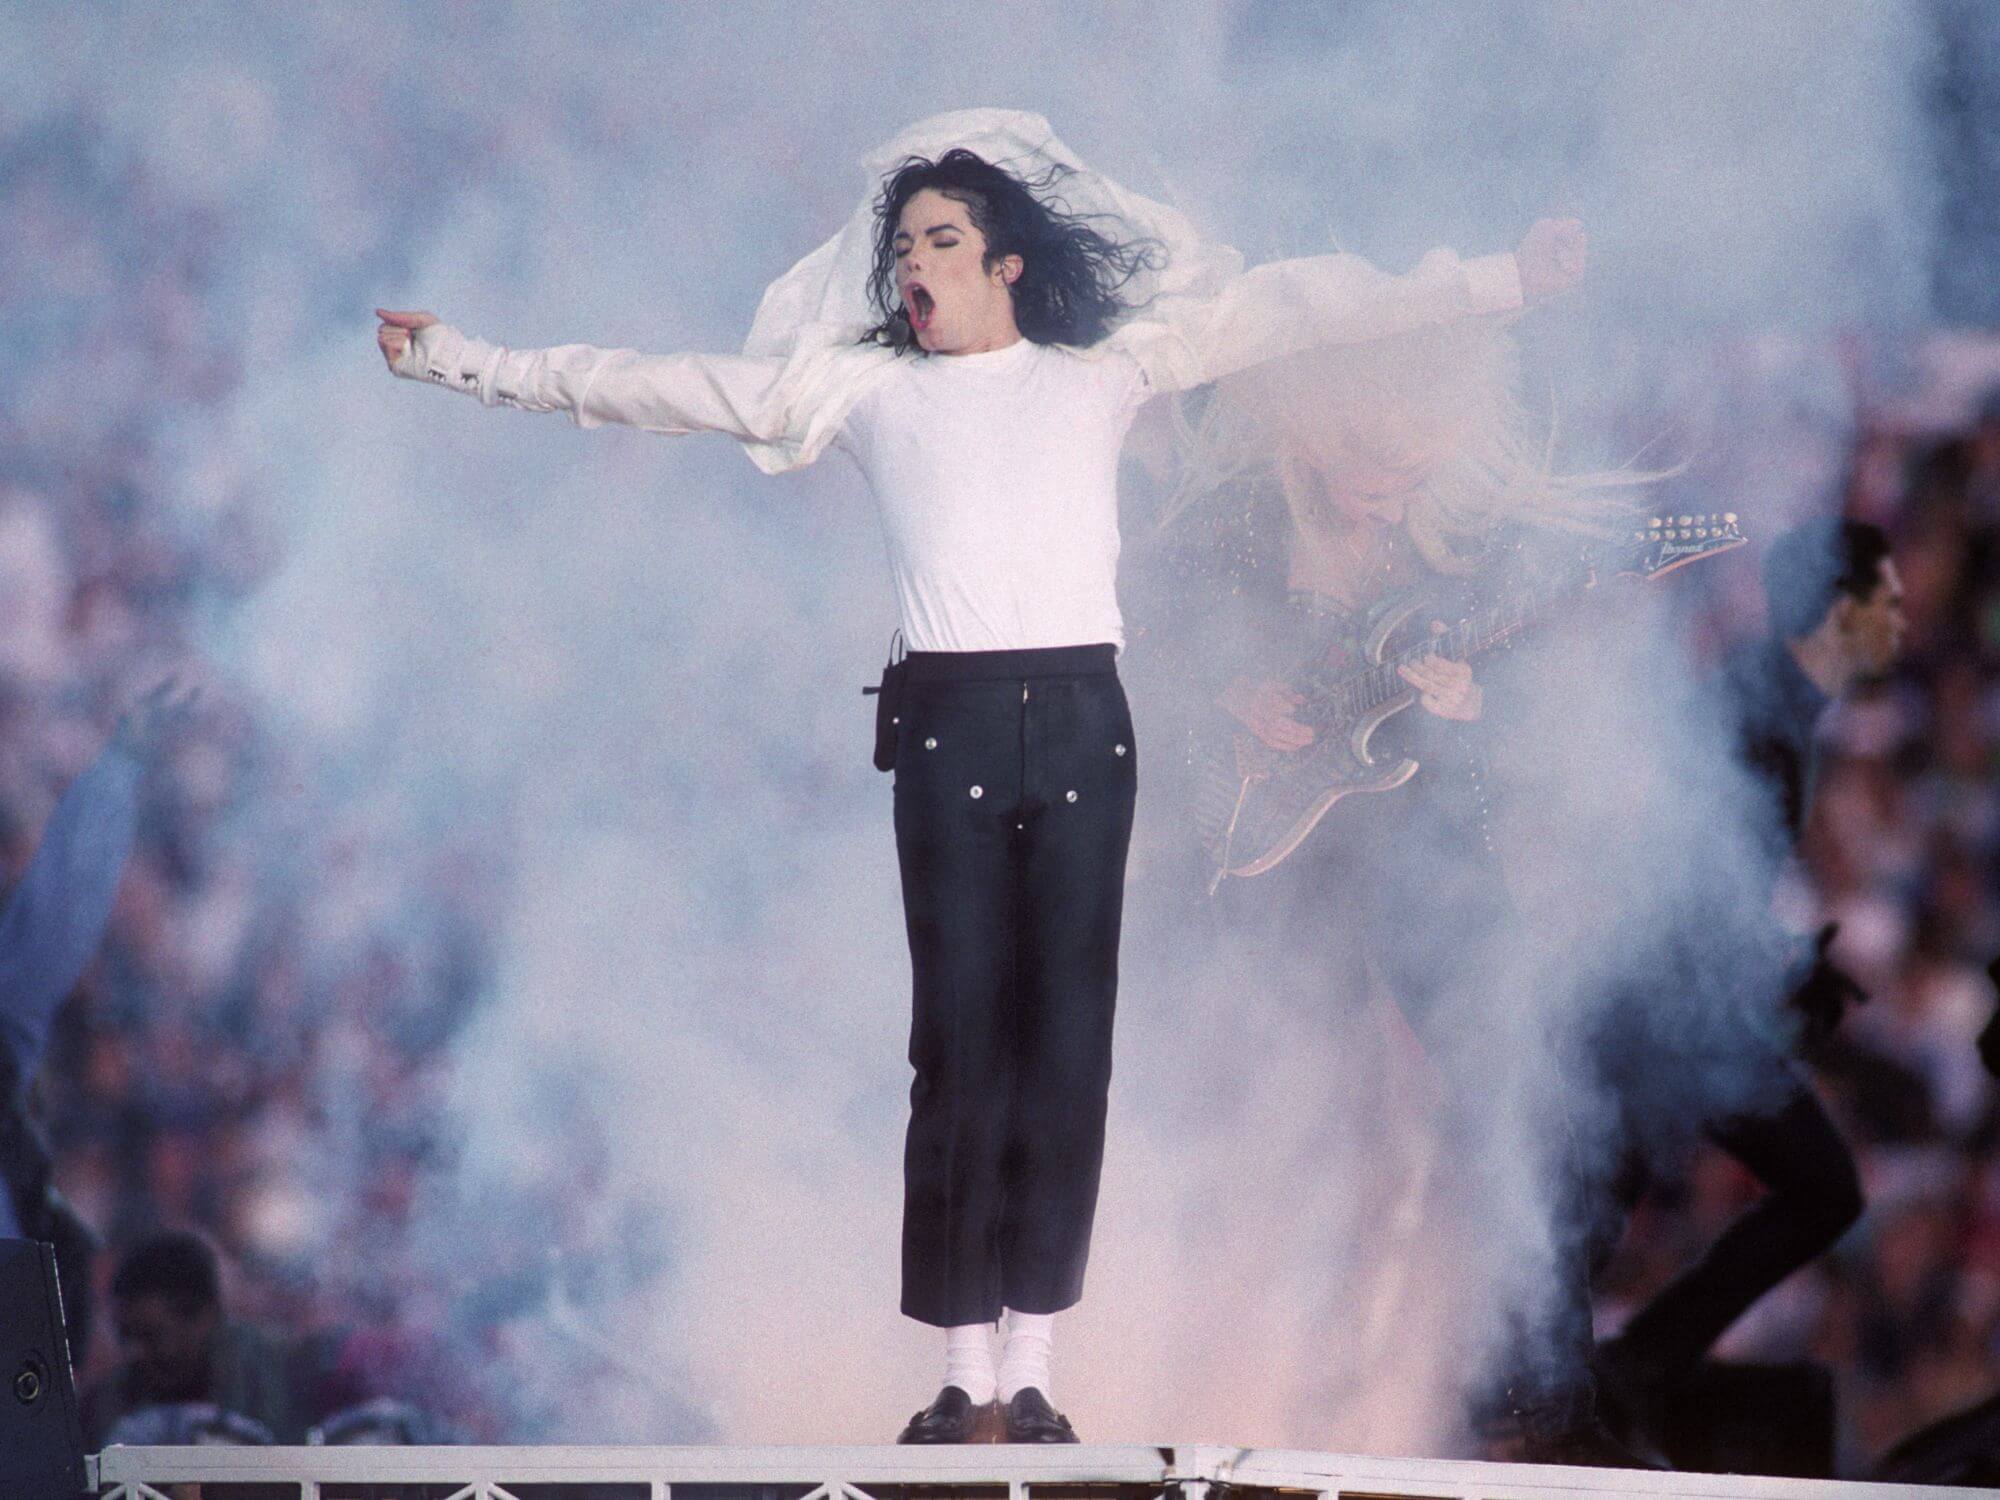 Michael Jackson performs at the Super Bowl XXVII Halftime on January 31, 1993